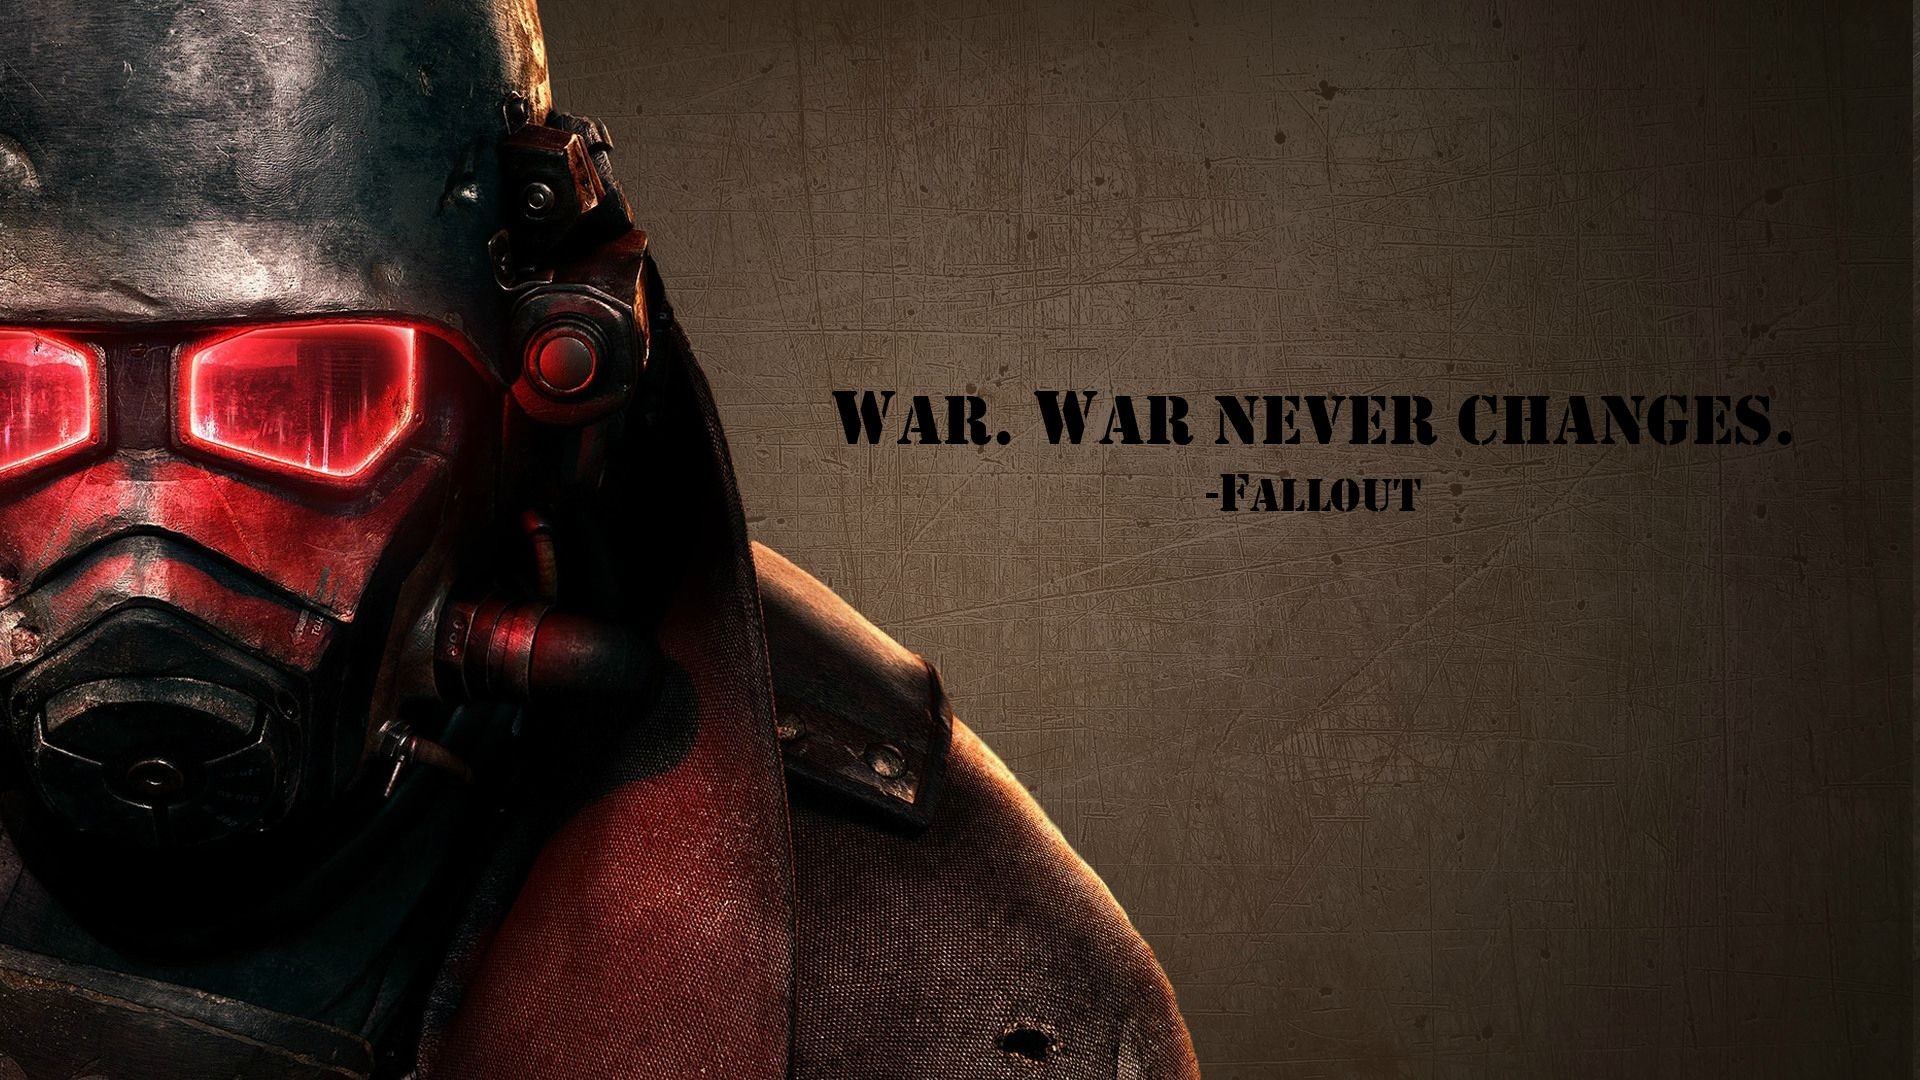 fallout 4 wallpaper 1920x1080,personal protective equipment,mask,fictional character,shooter game,headgear